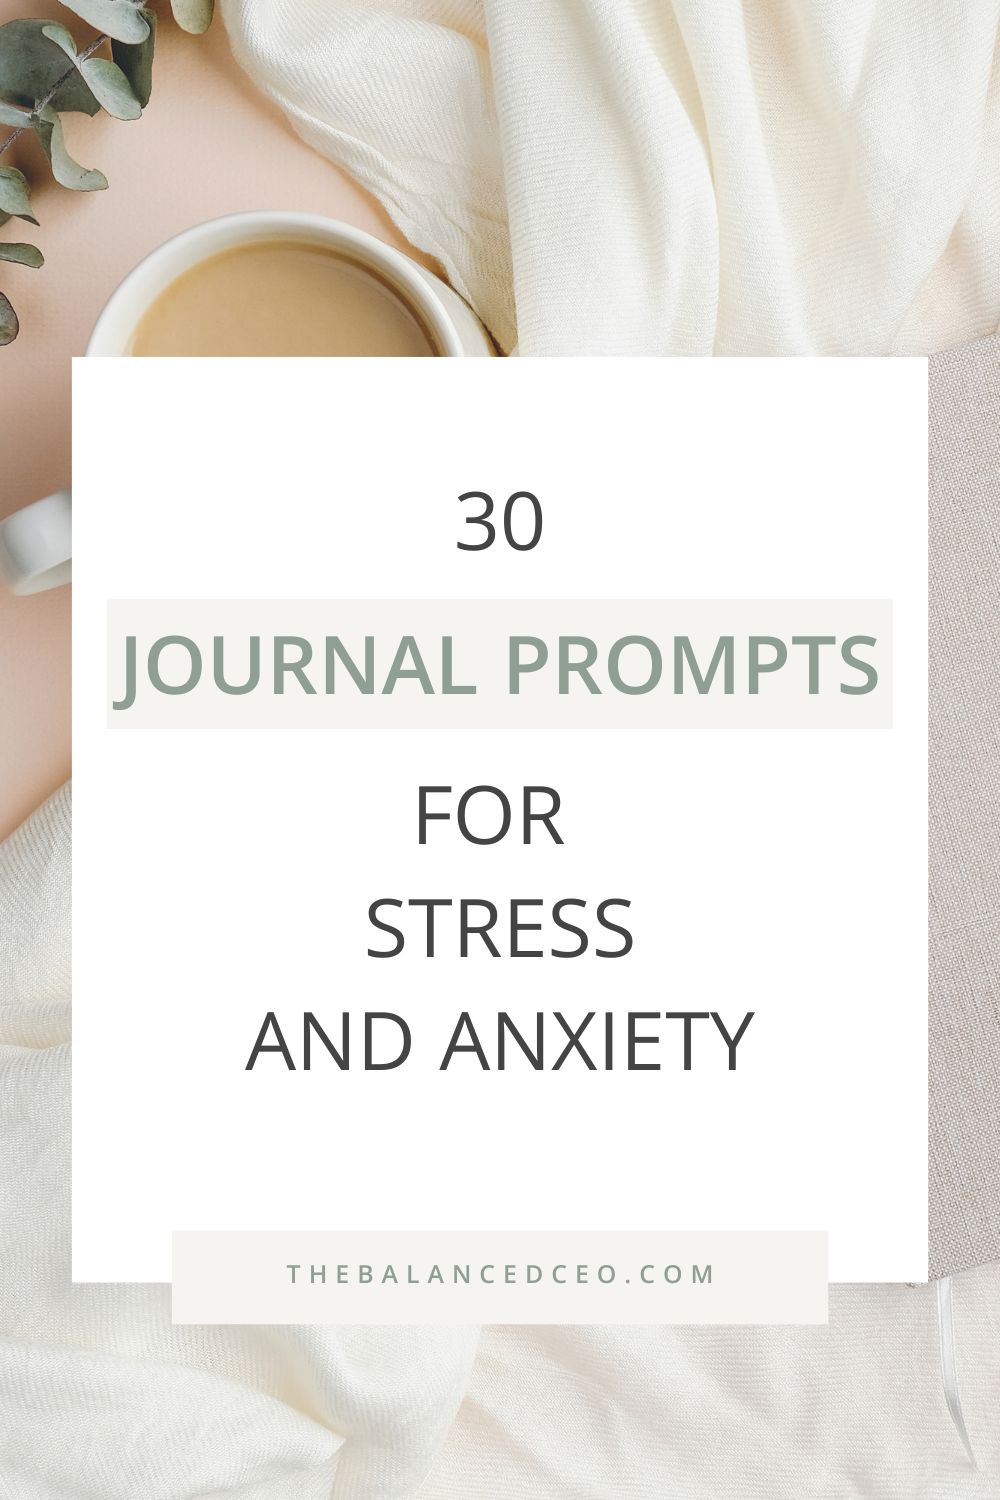 30 Journal Prompts for Stress and Anxiety